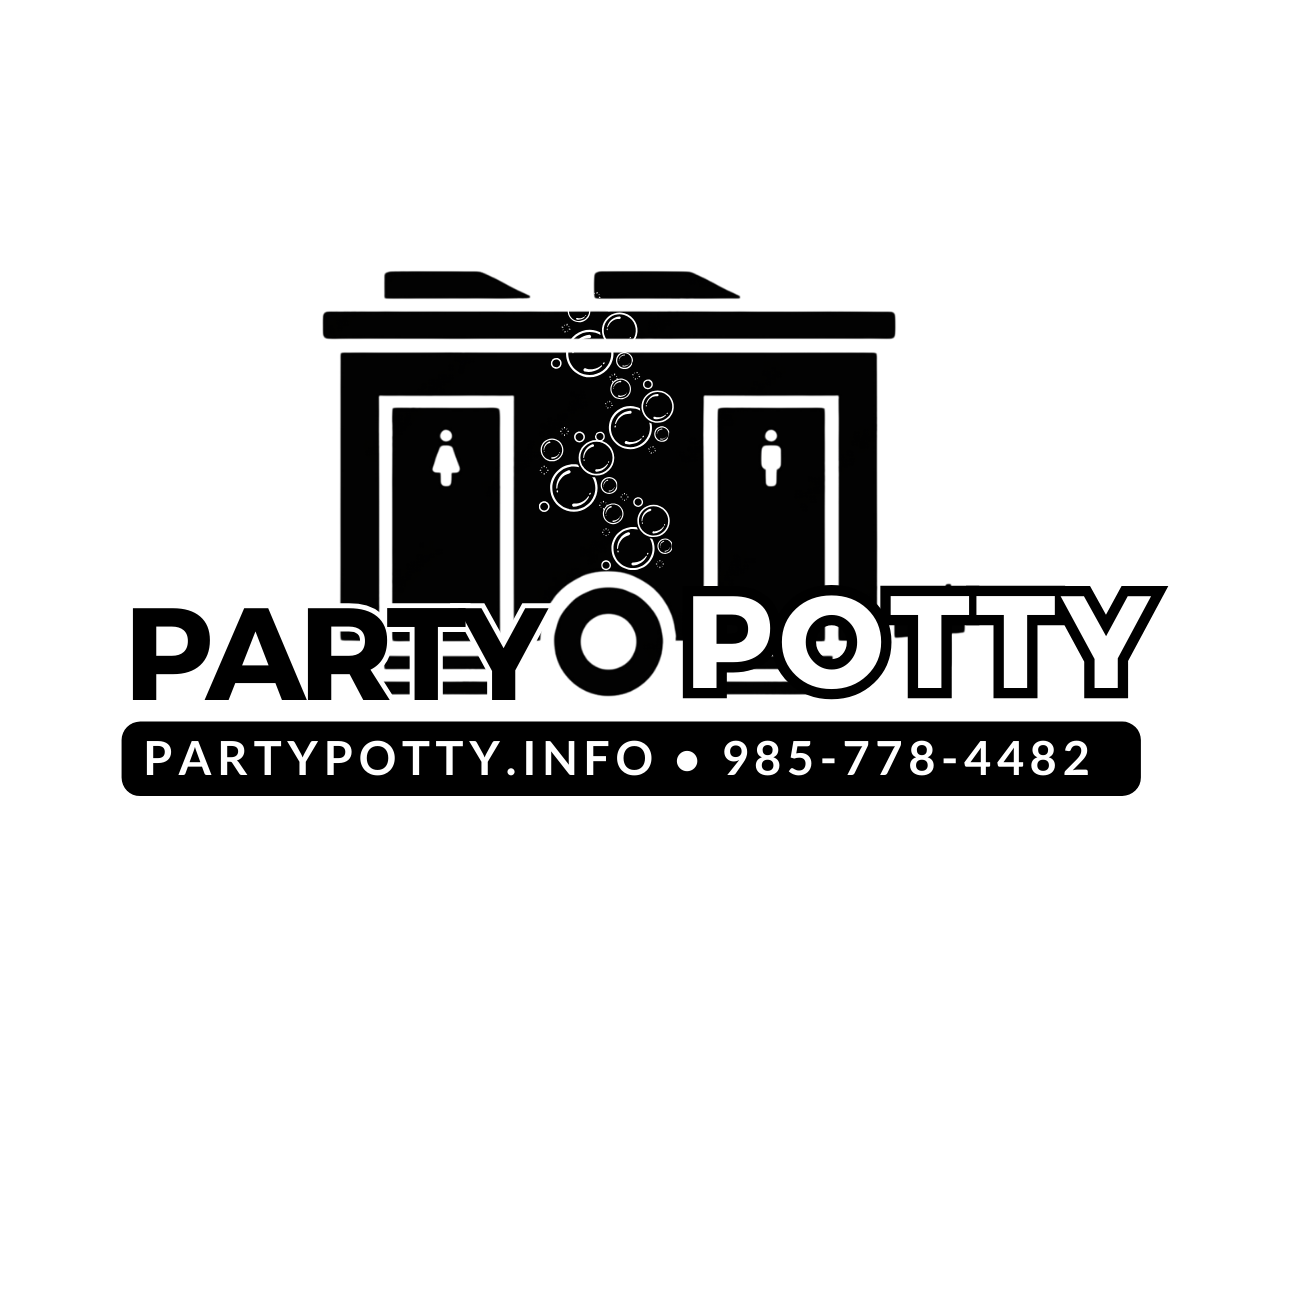 PARTY_POTTY_LOGO(1).png